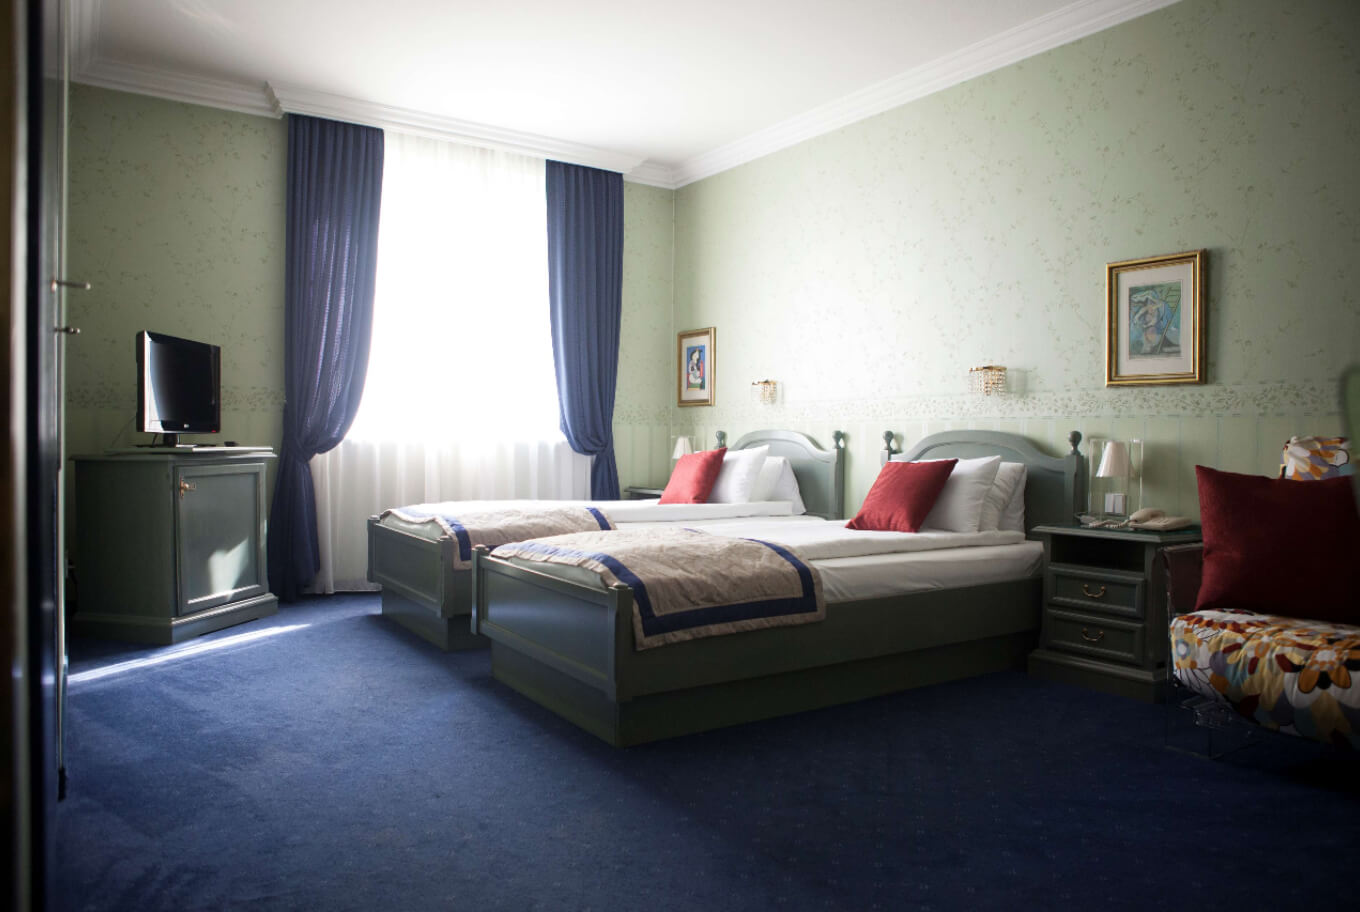 In our spacious suite you will feel at home. Perfect for an overnight stay in Vienna.